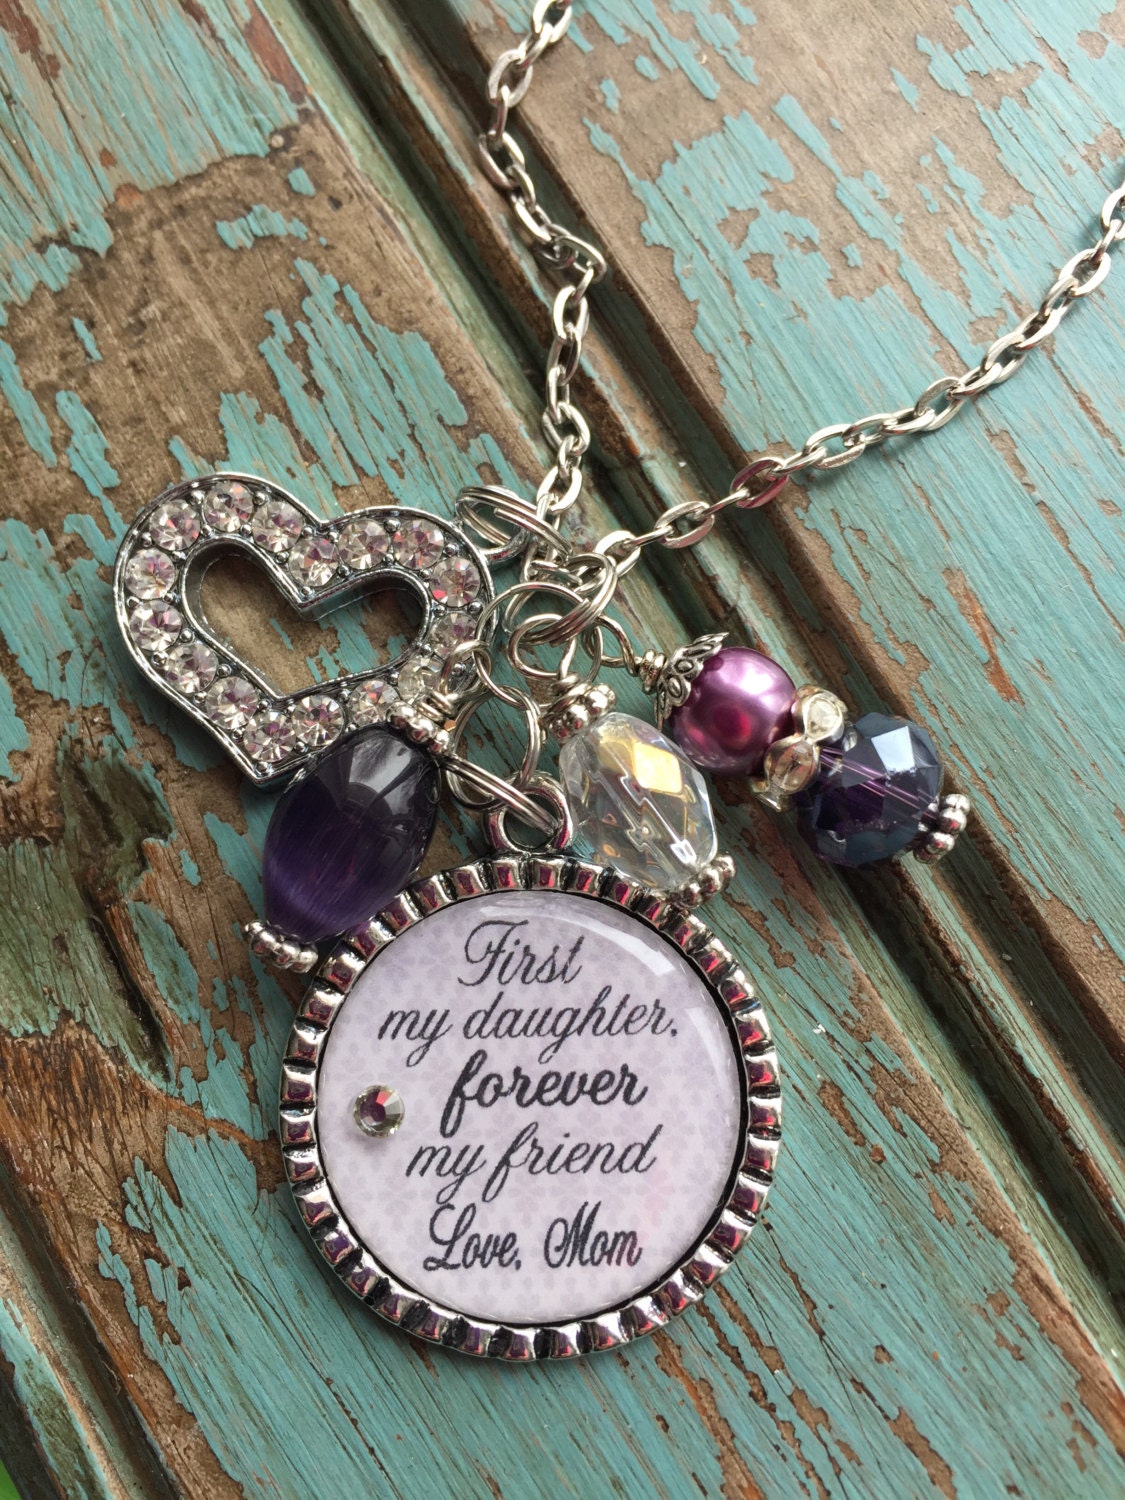 BRIDE GIFT from mom necklace First my daughter forever my